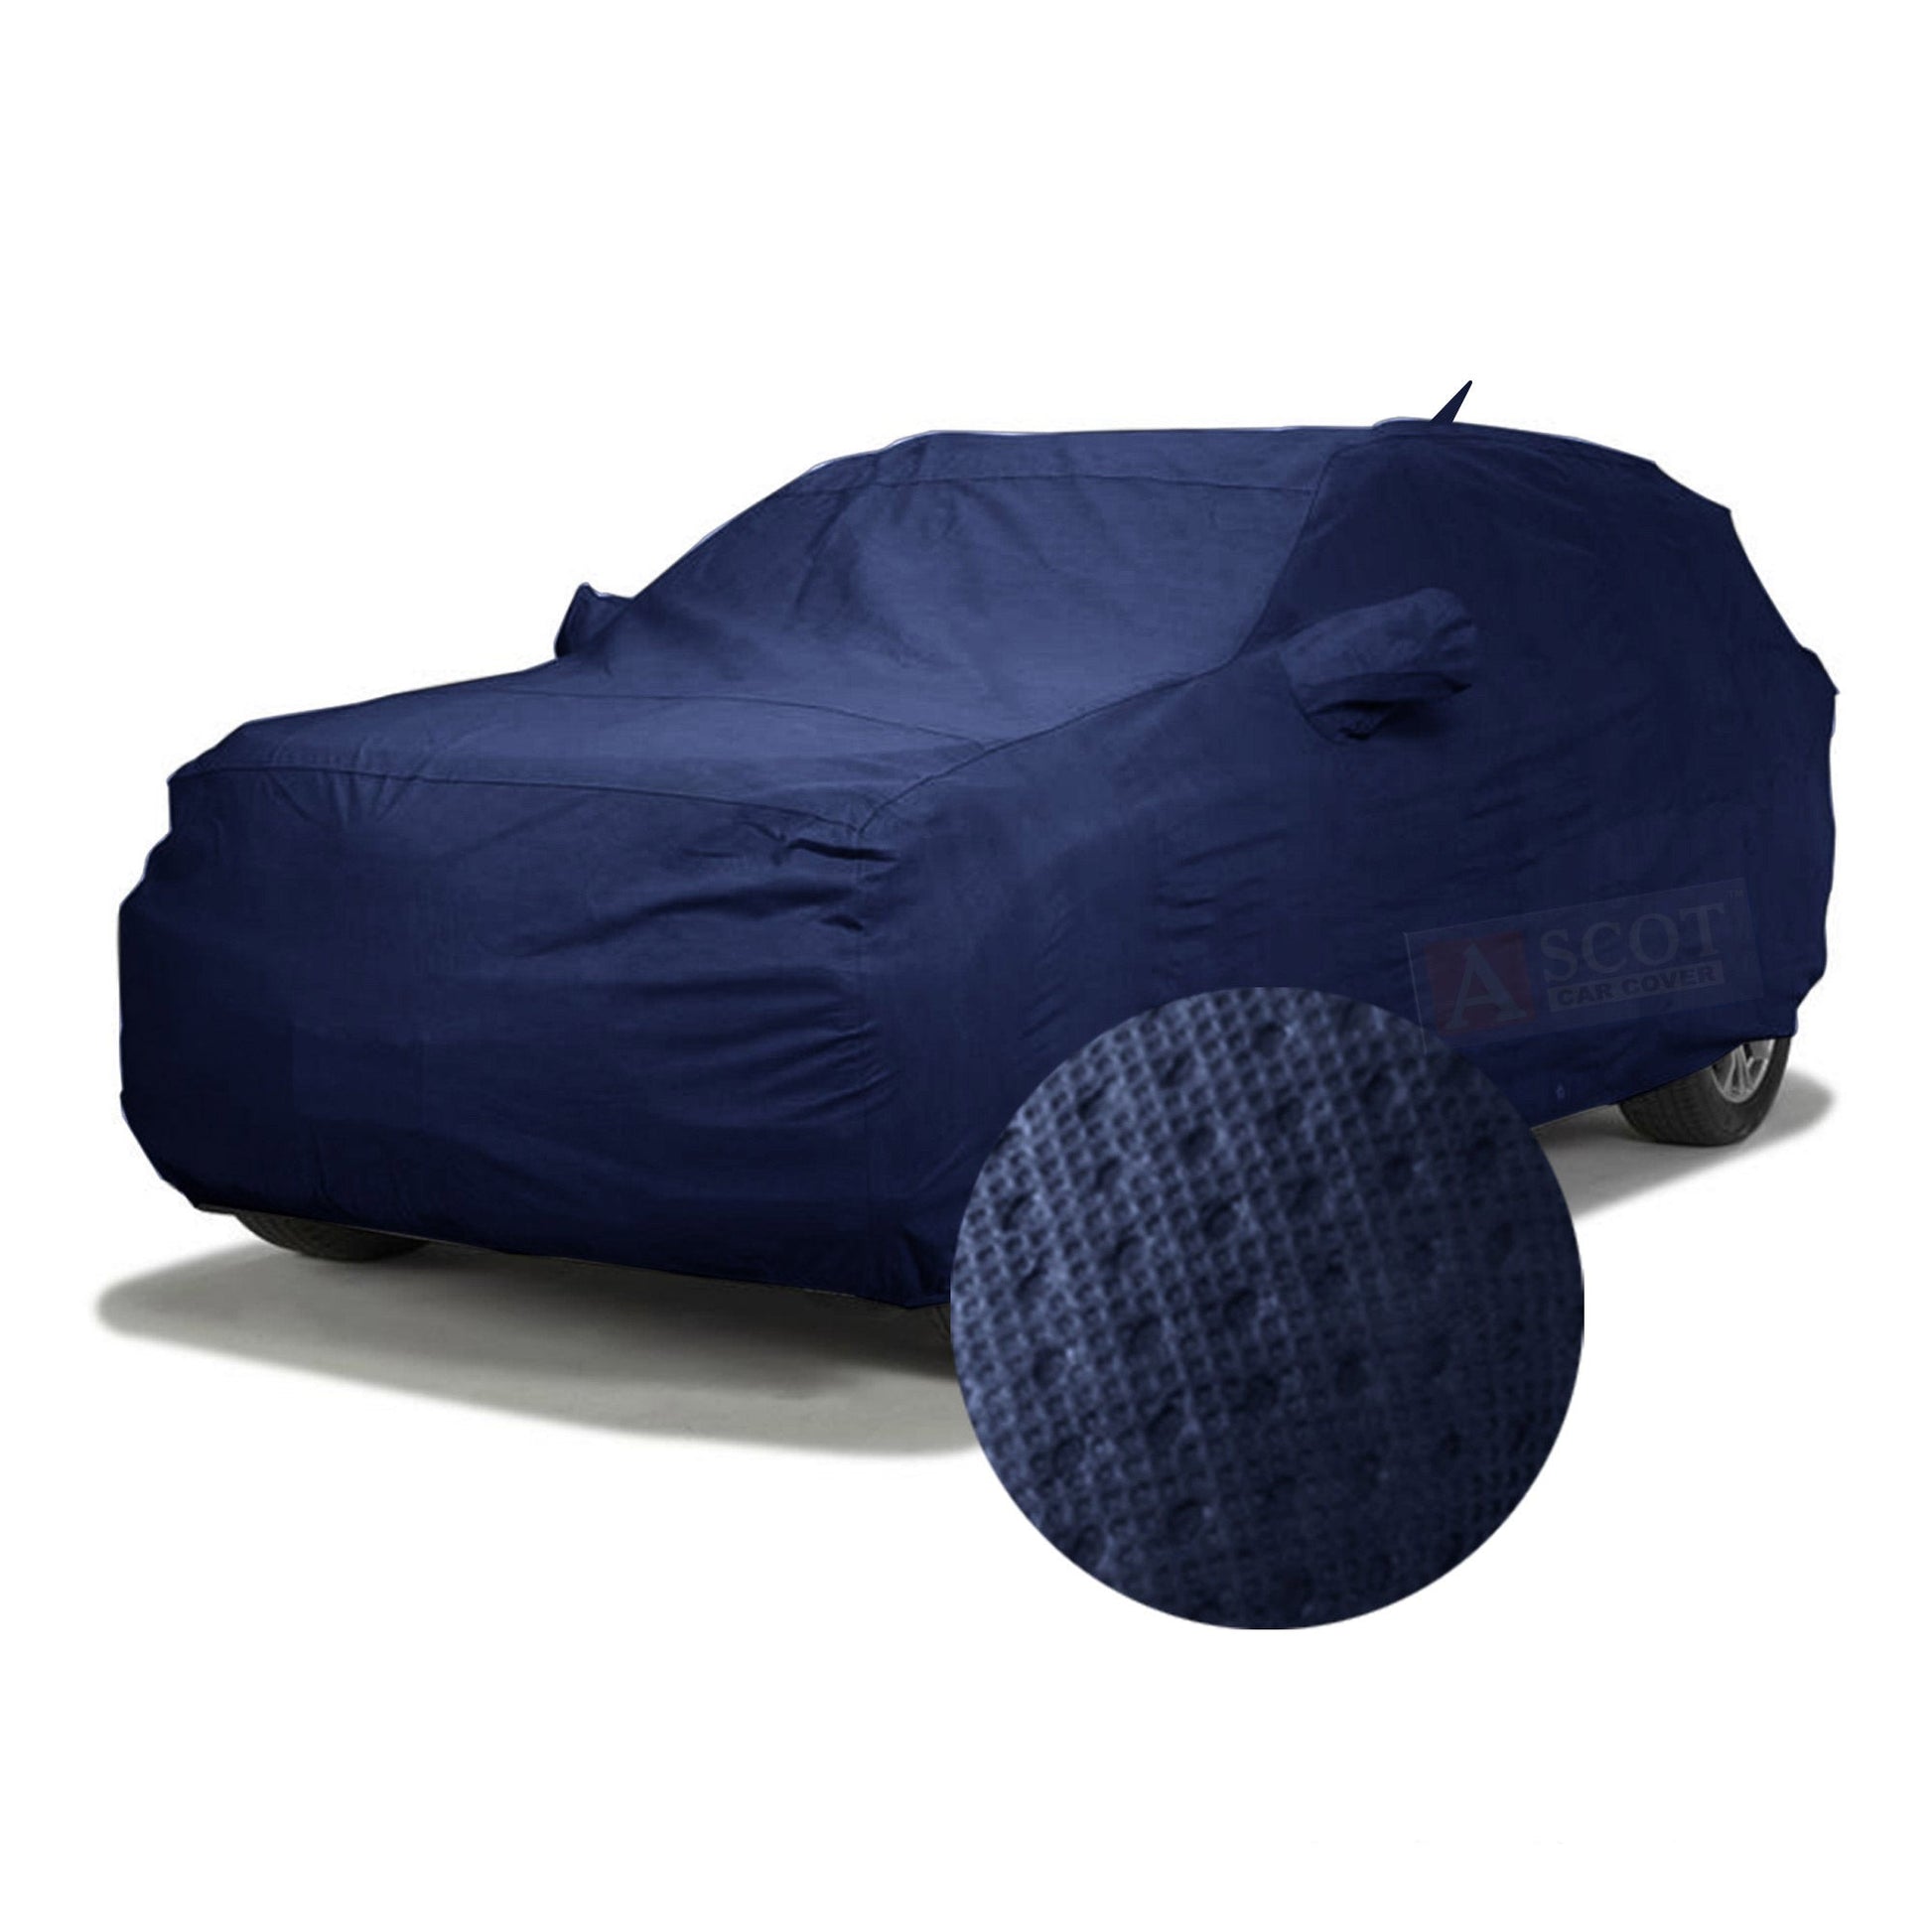  Cartrend 70338 Half car Cover New Generation, Weatherproof,  Size S, Polyester Blue, for VW Polo and Similar Models : Automotive